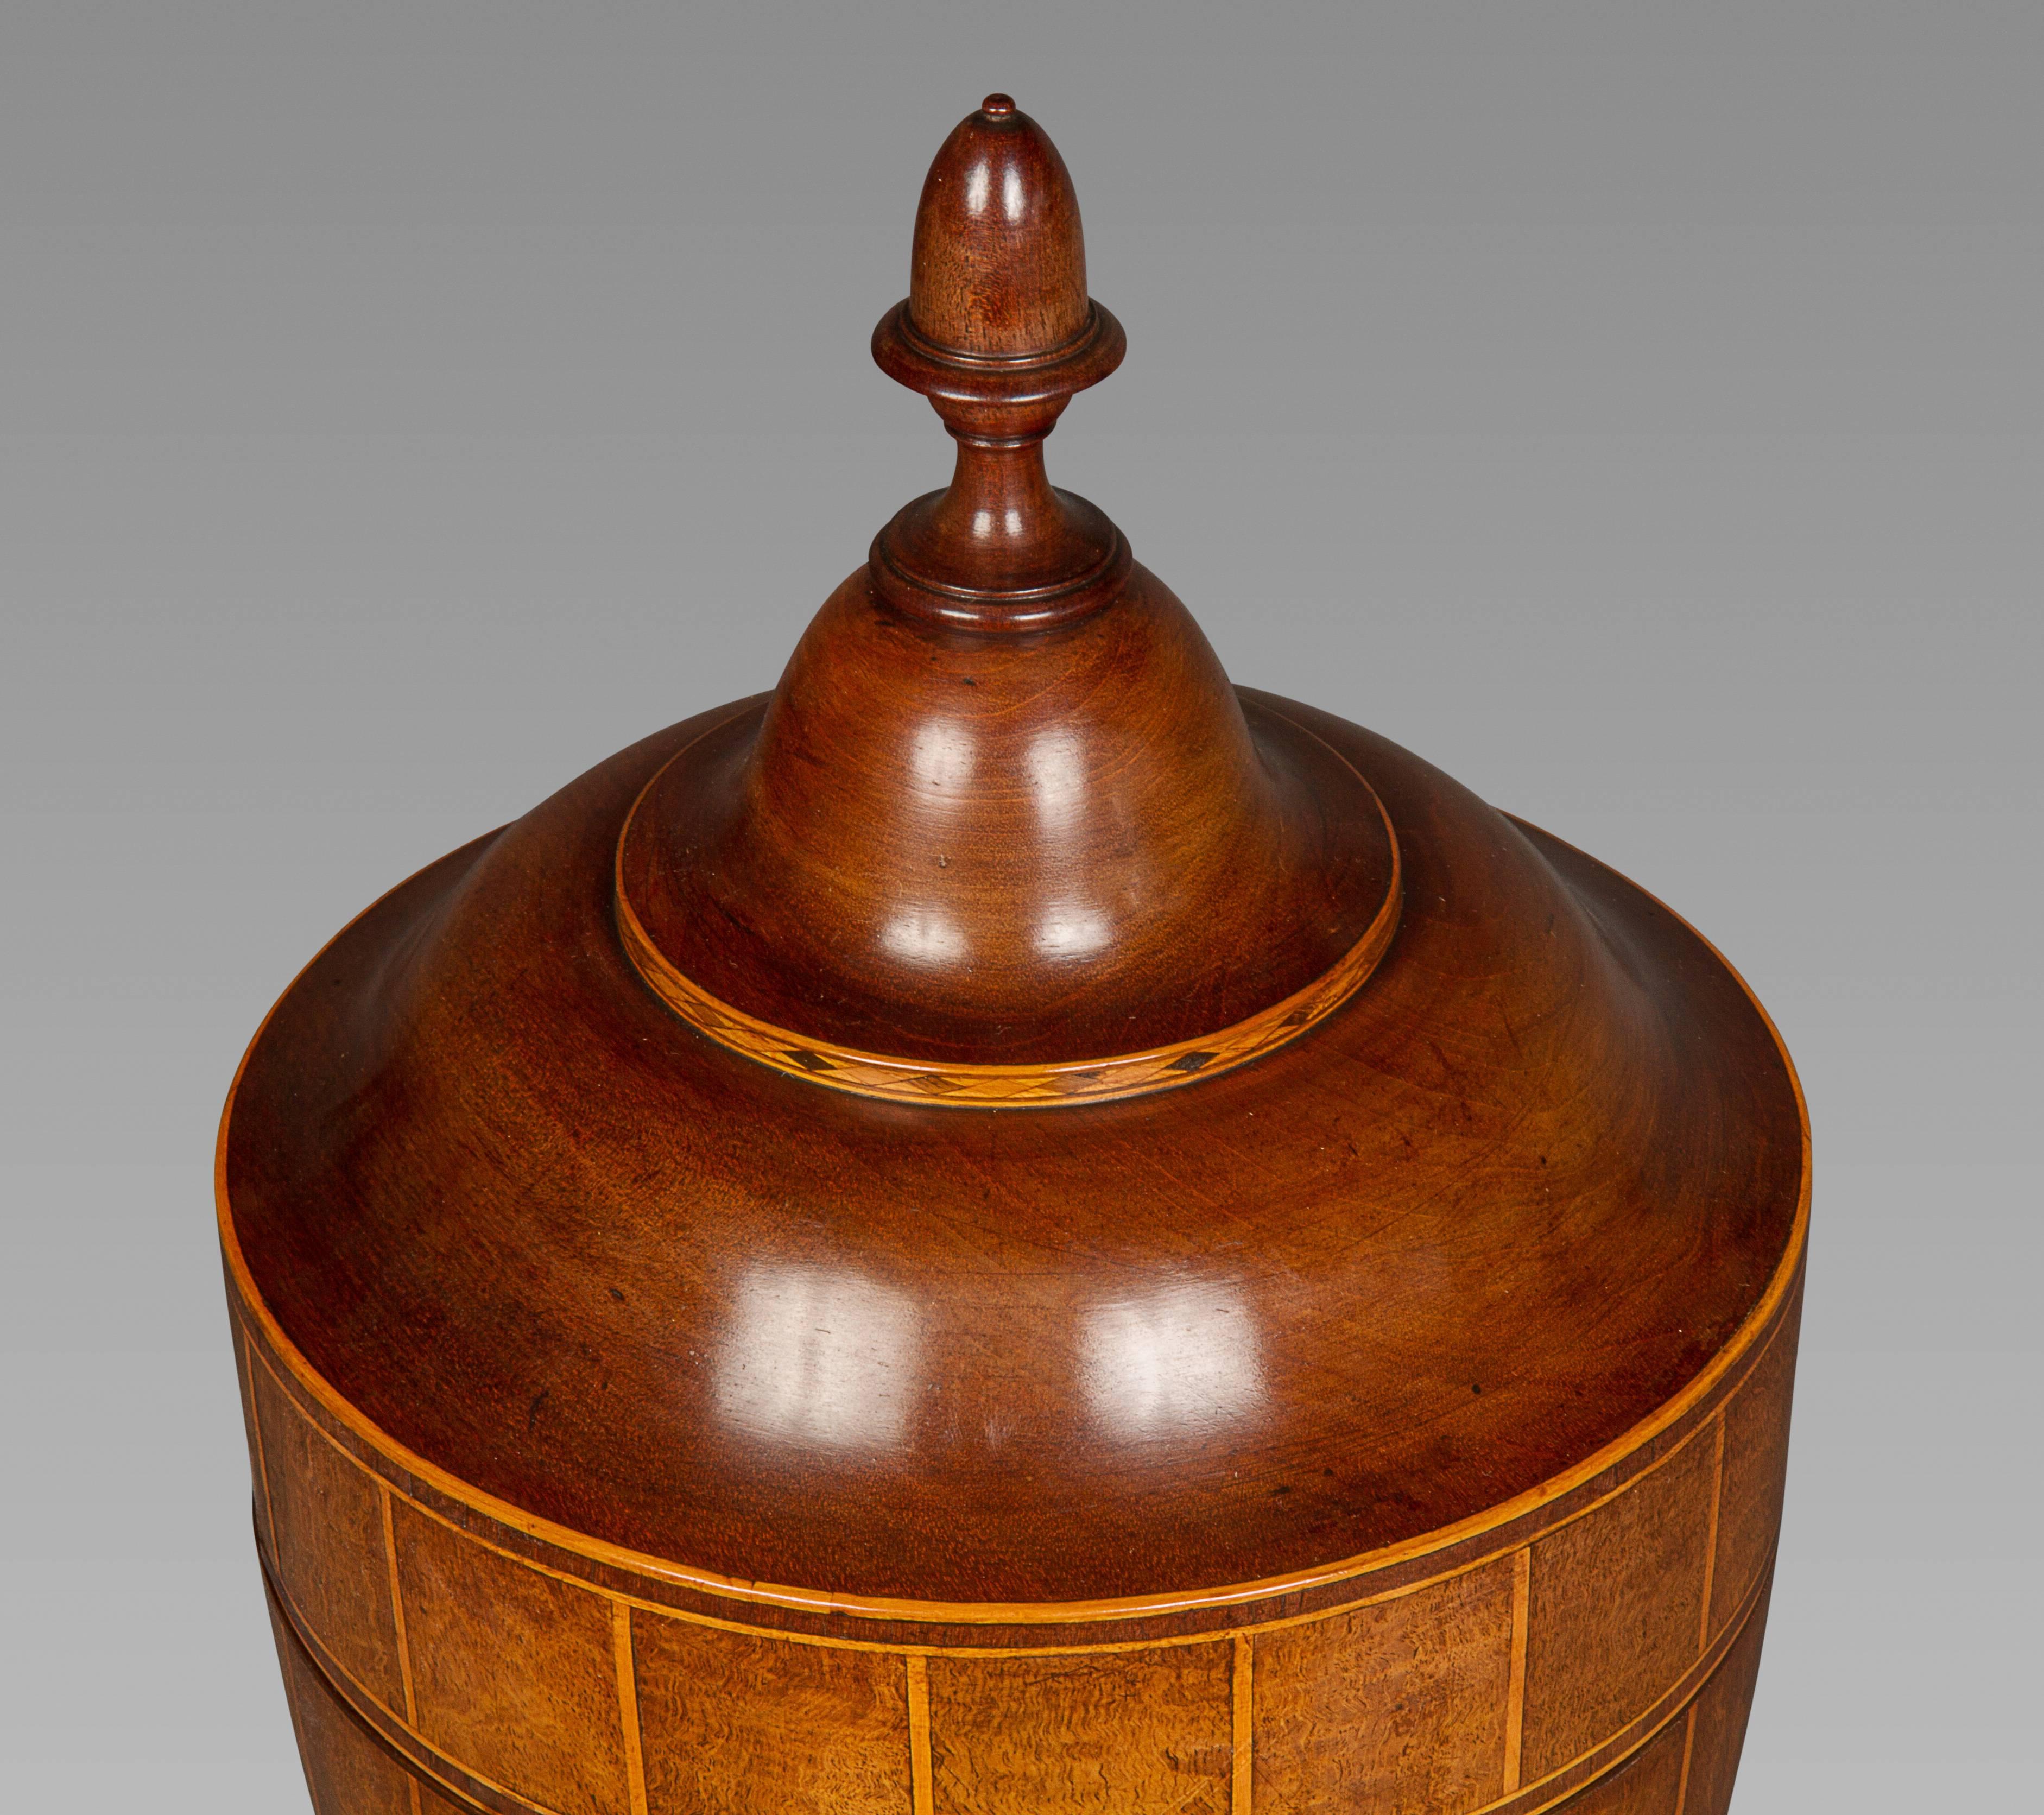 A superb pair of period urns with acorn finials, the bodies veneered in alternating panels of mahogany and beautifully figured burr mahogany, inlaid with satinwood stringing, on stepped square bases, with original felt to the bases. The color and